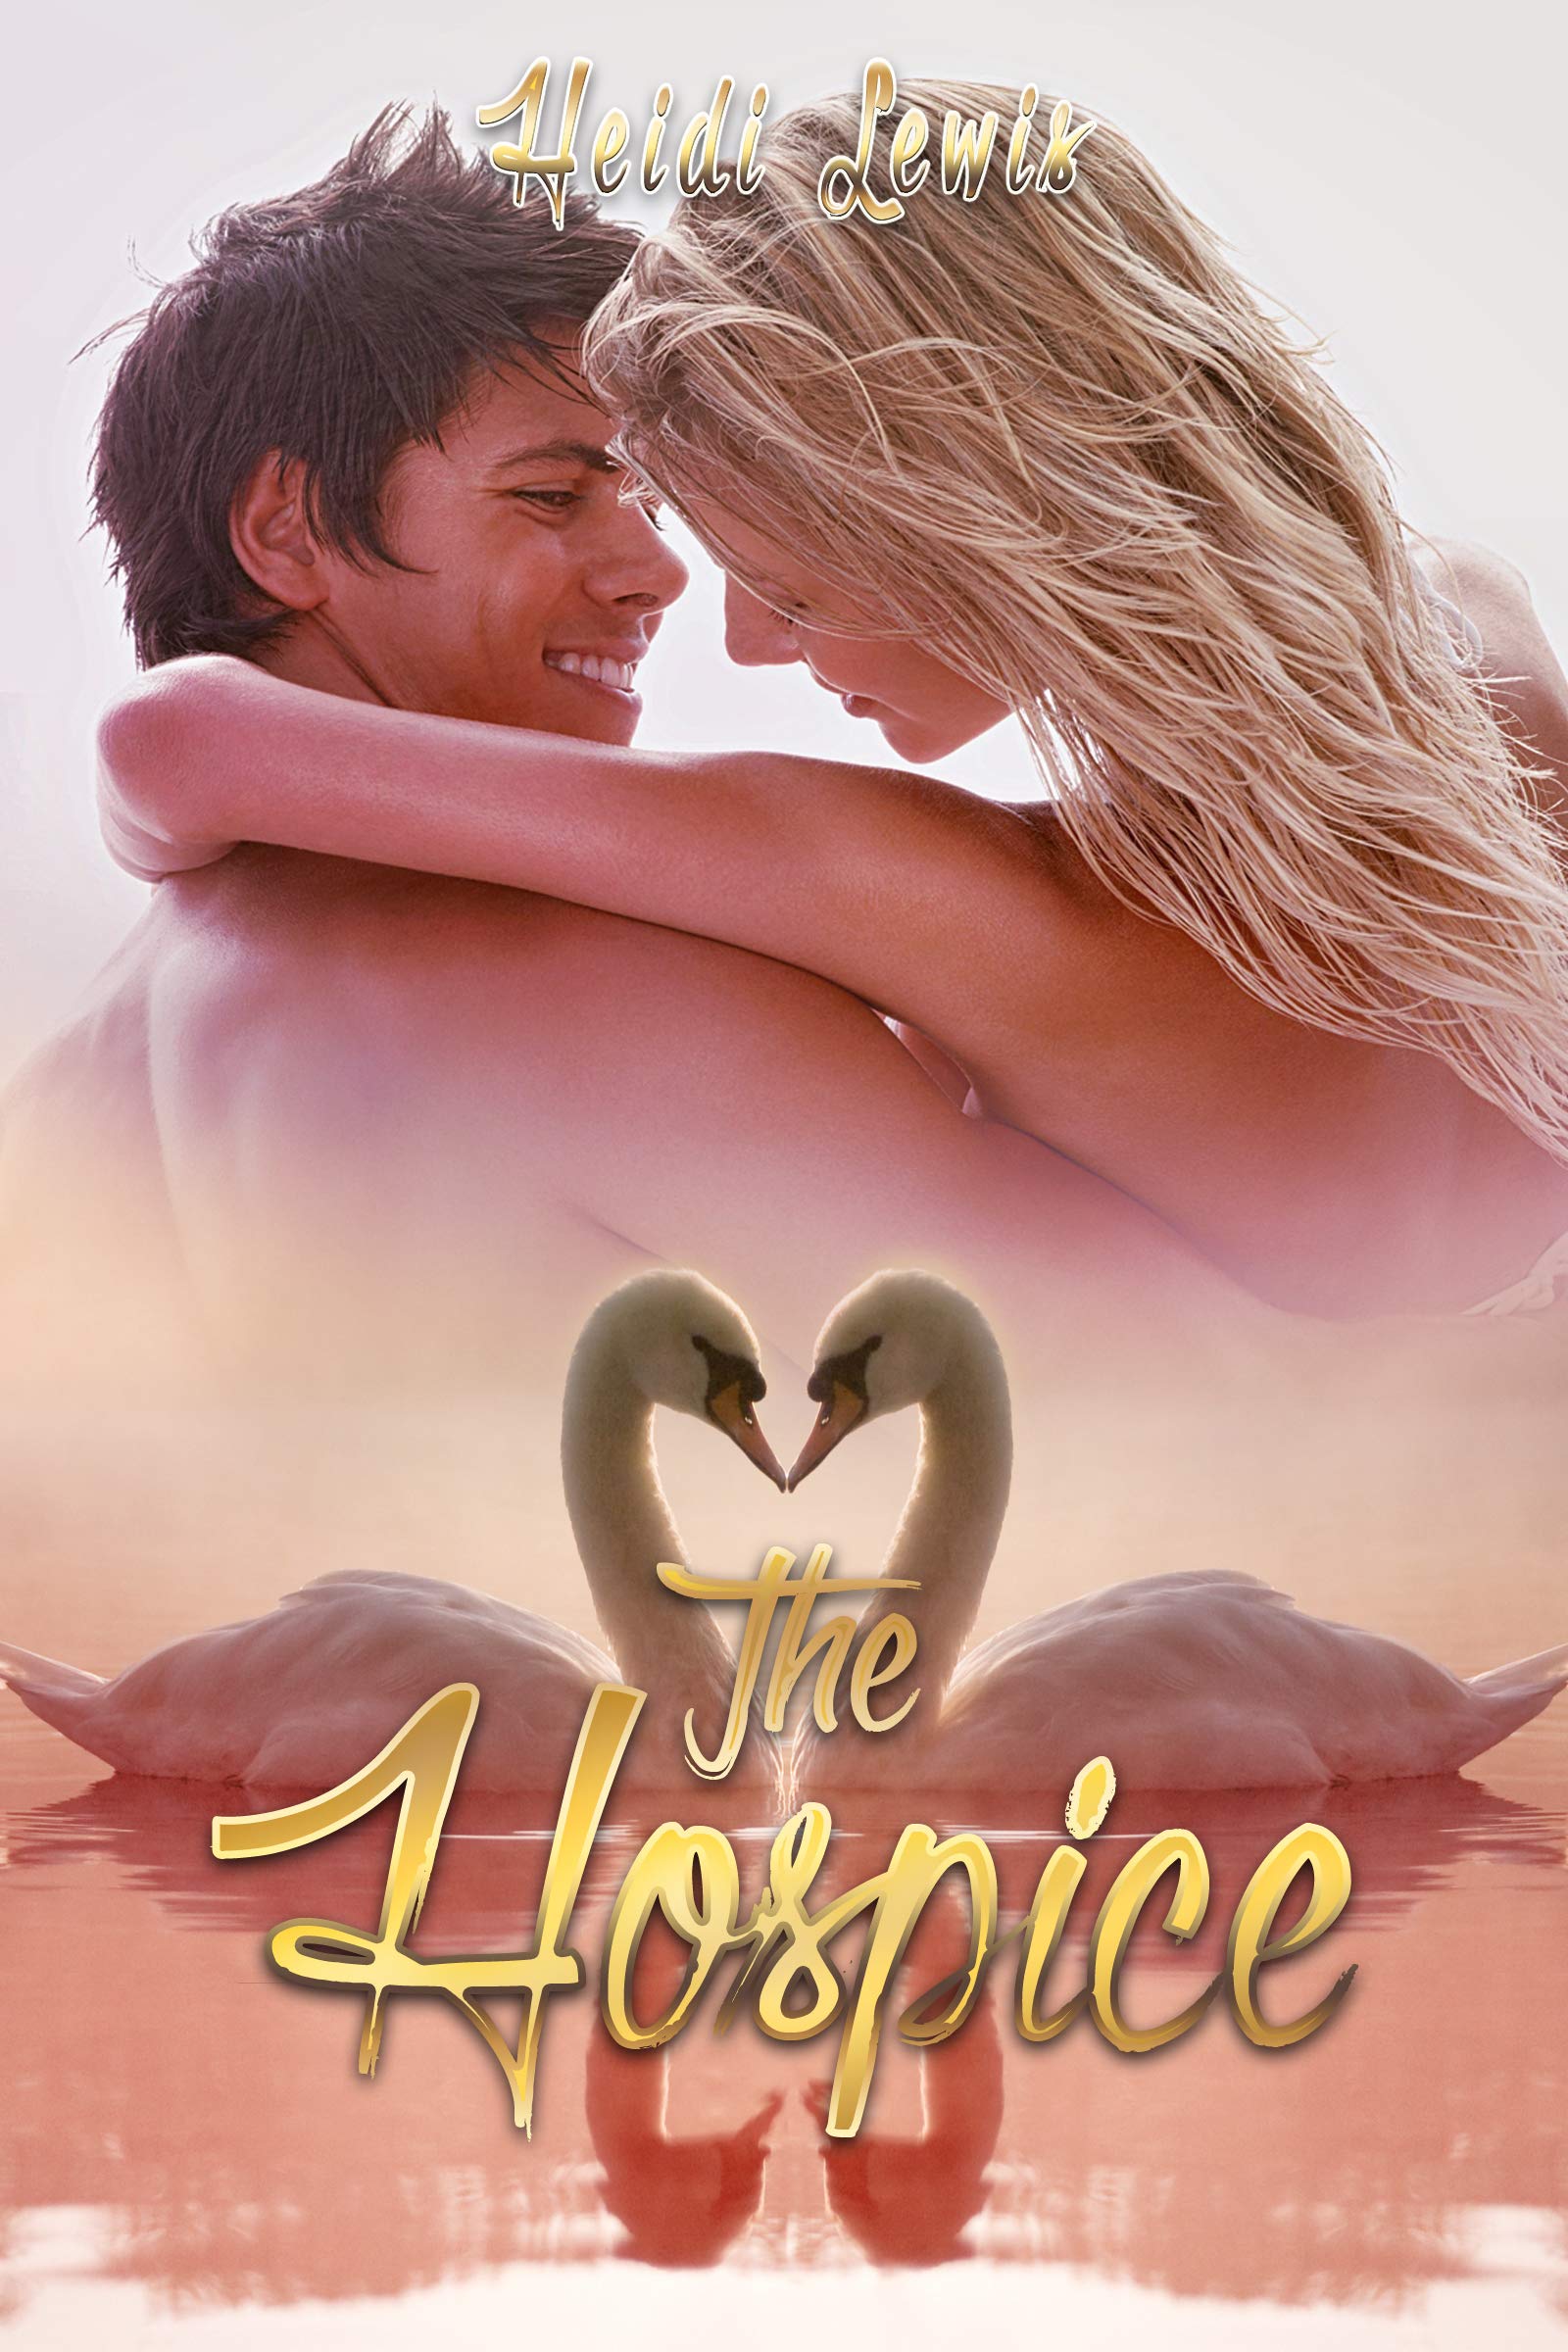 FREE: The Hospice by Heidi Lewis